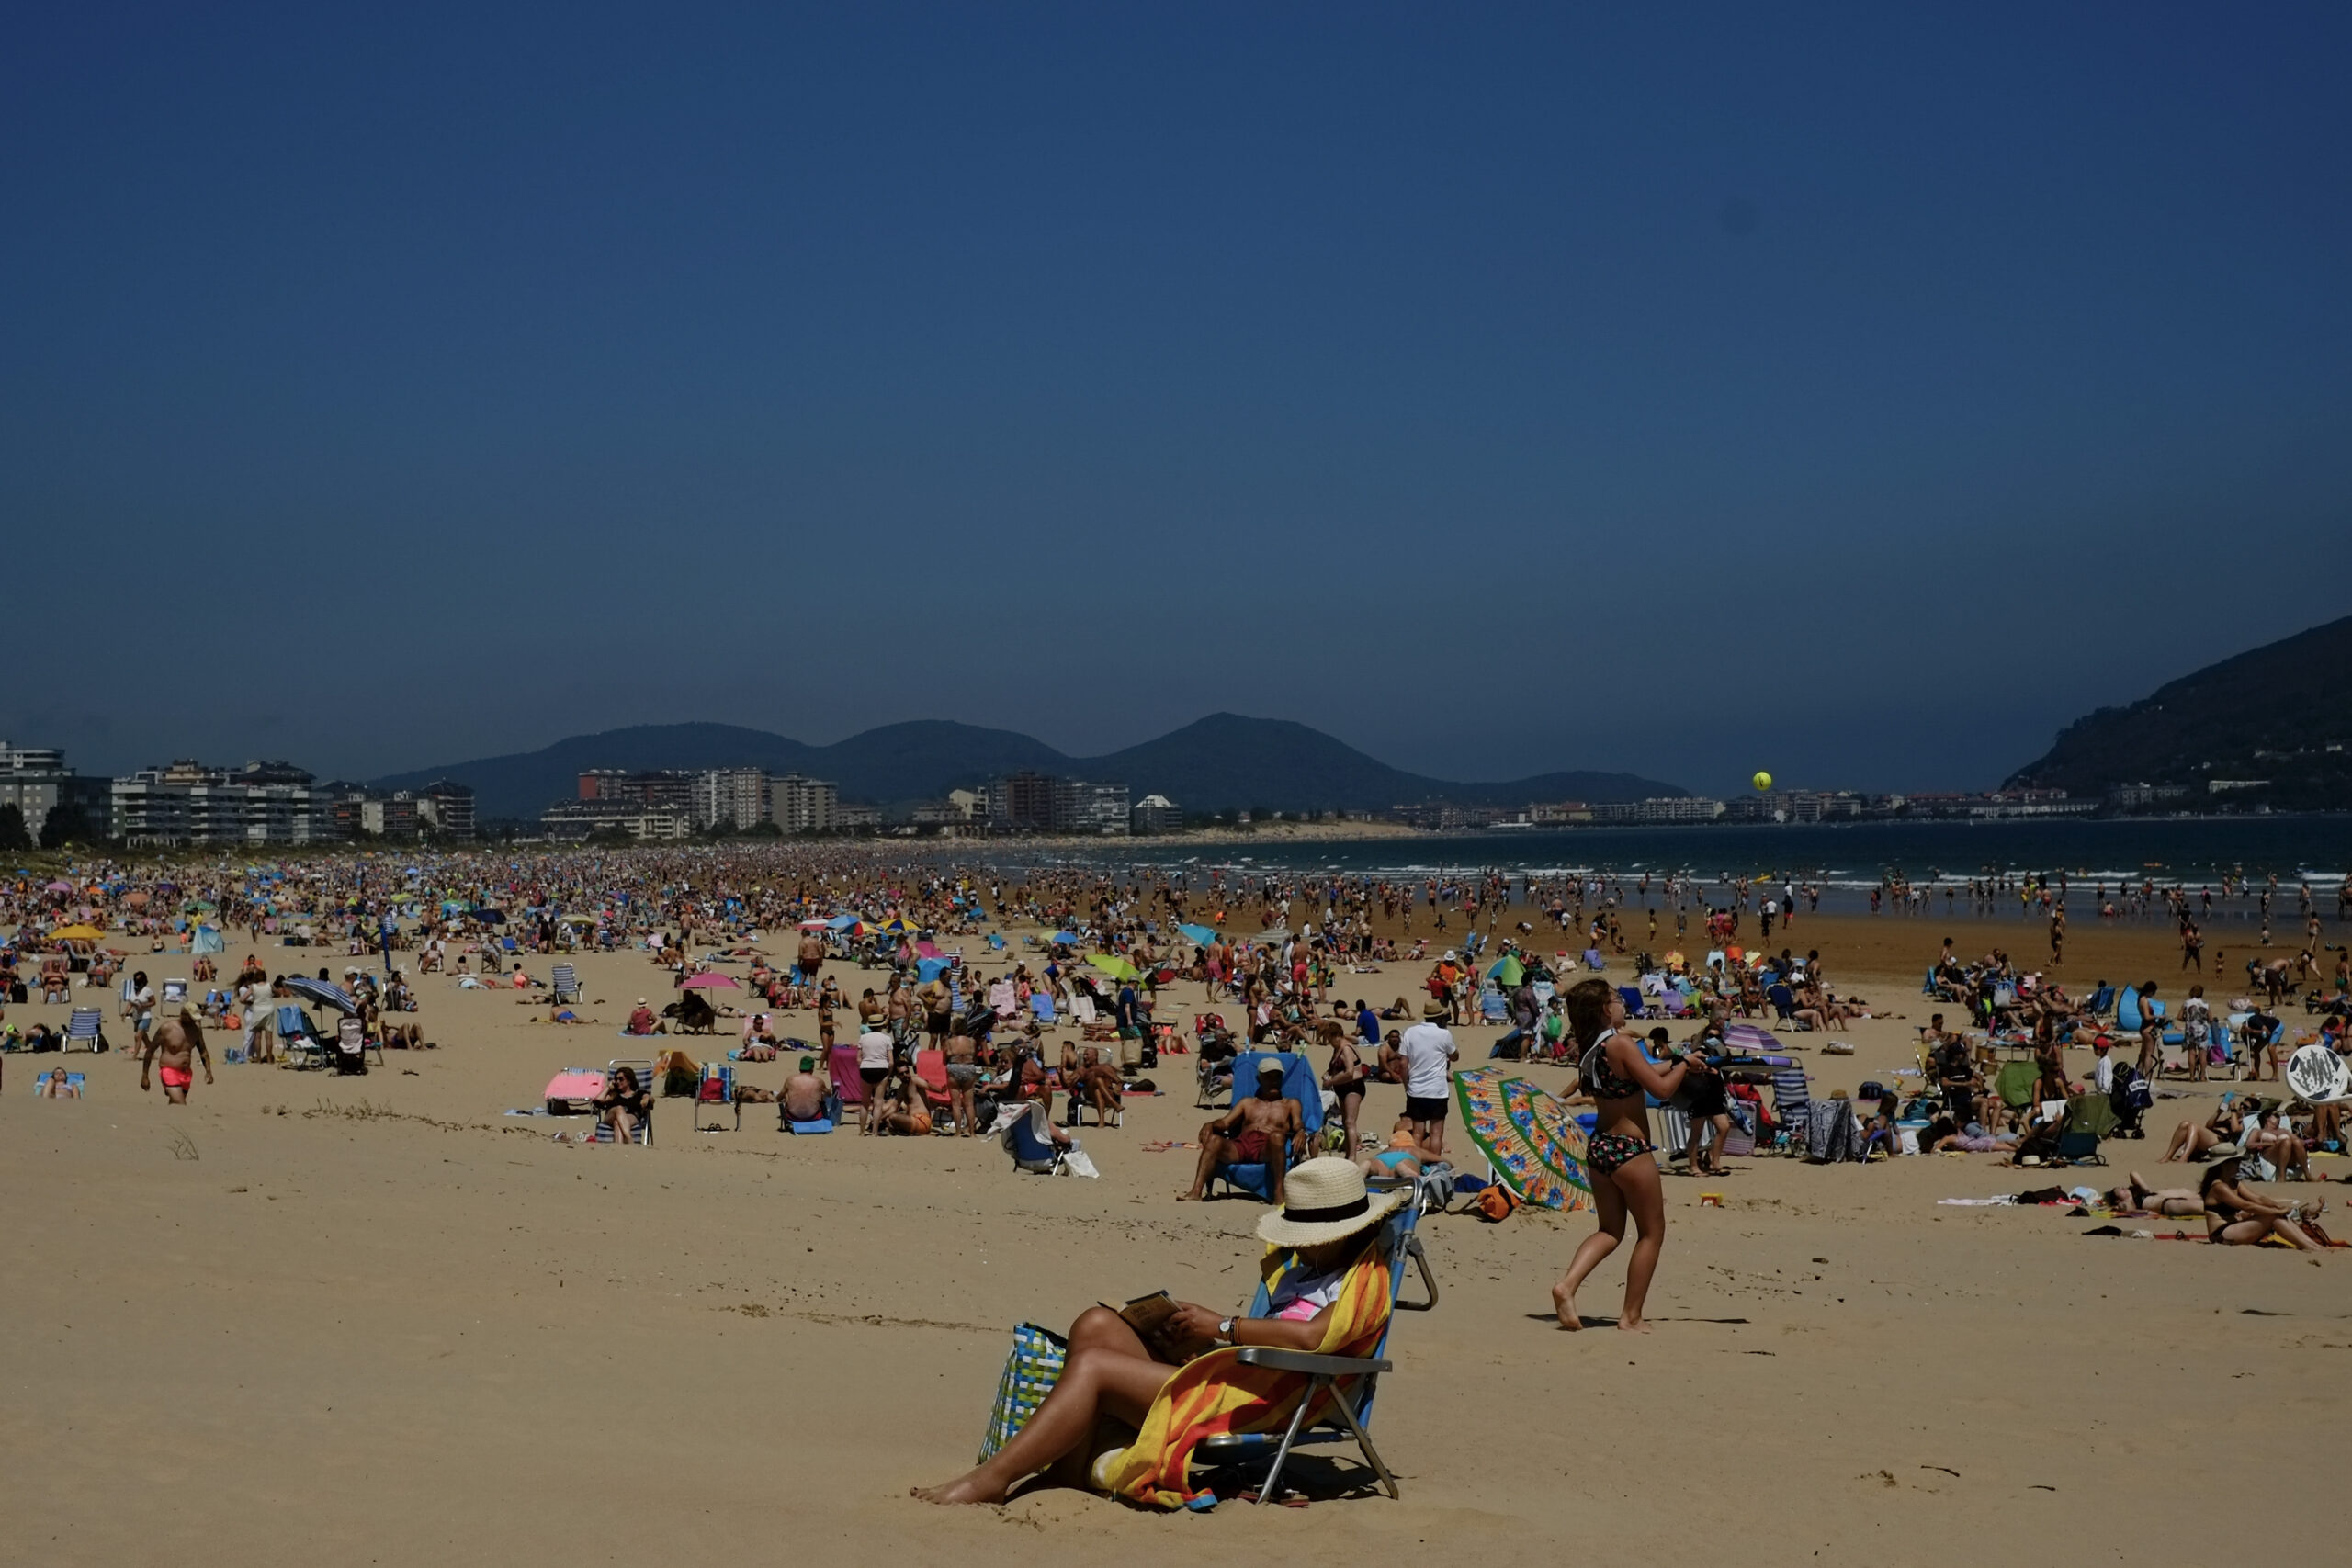 People on a beach in Spain